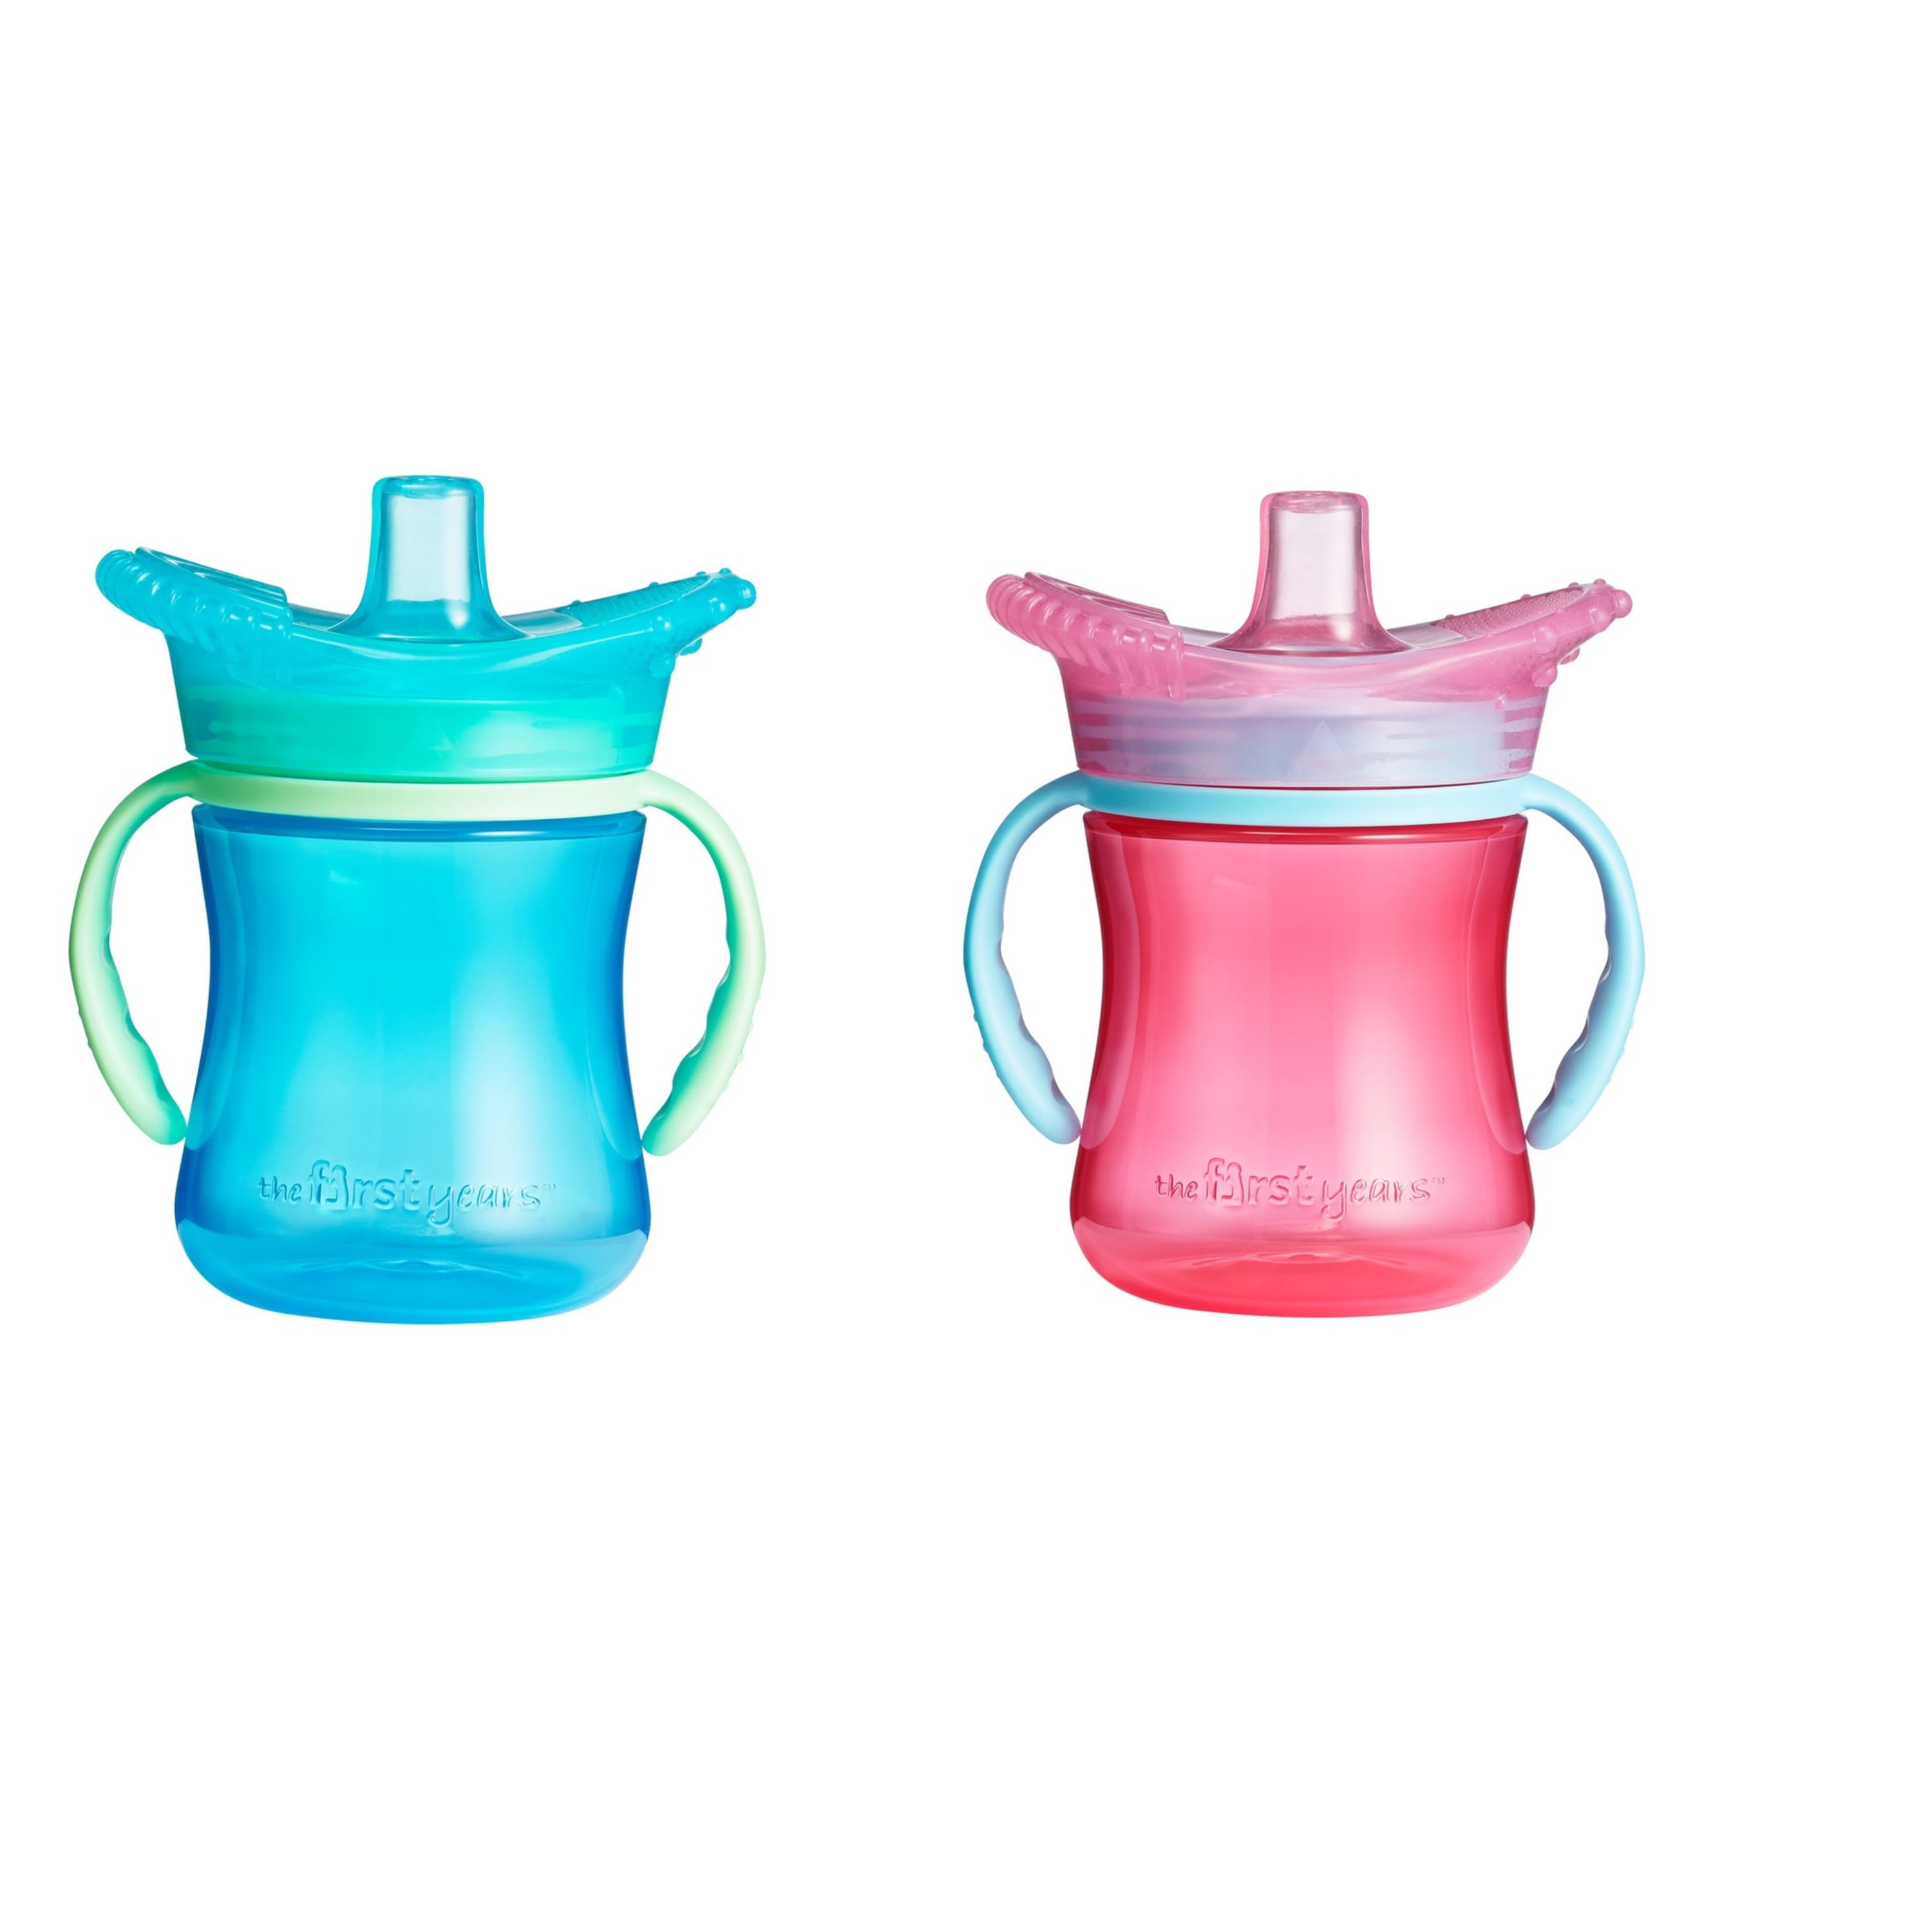 Valueder Kids Baby Toddler Cups Mug Sippy Learning Trainer Cup for